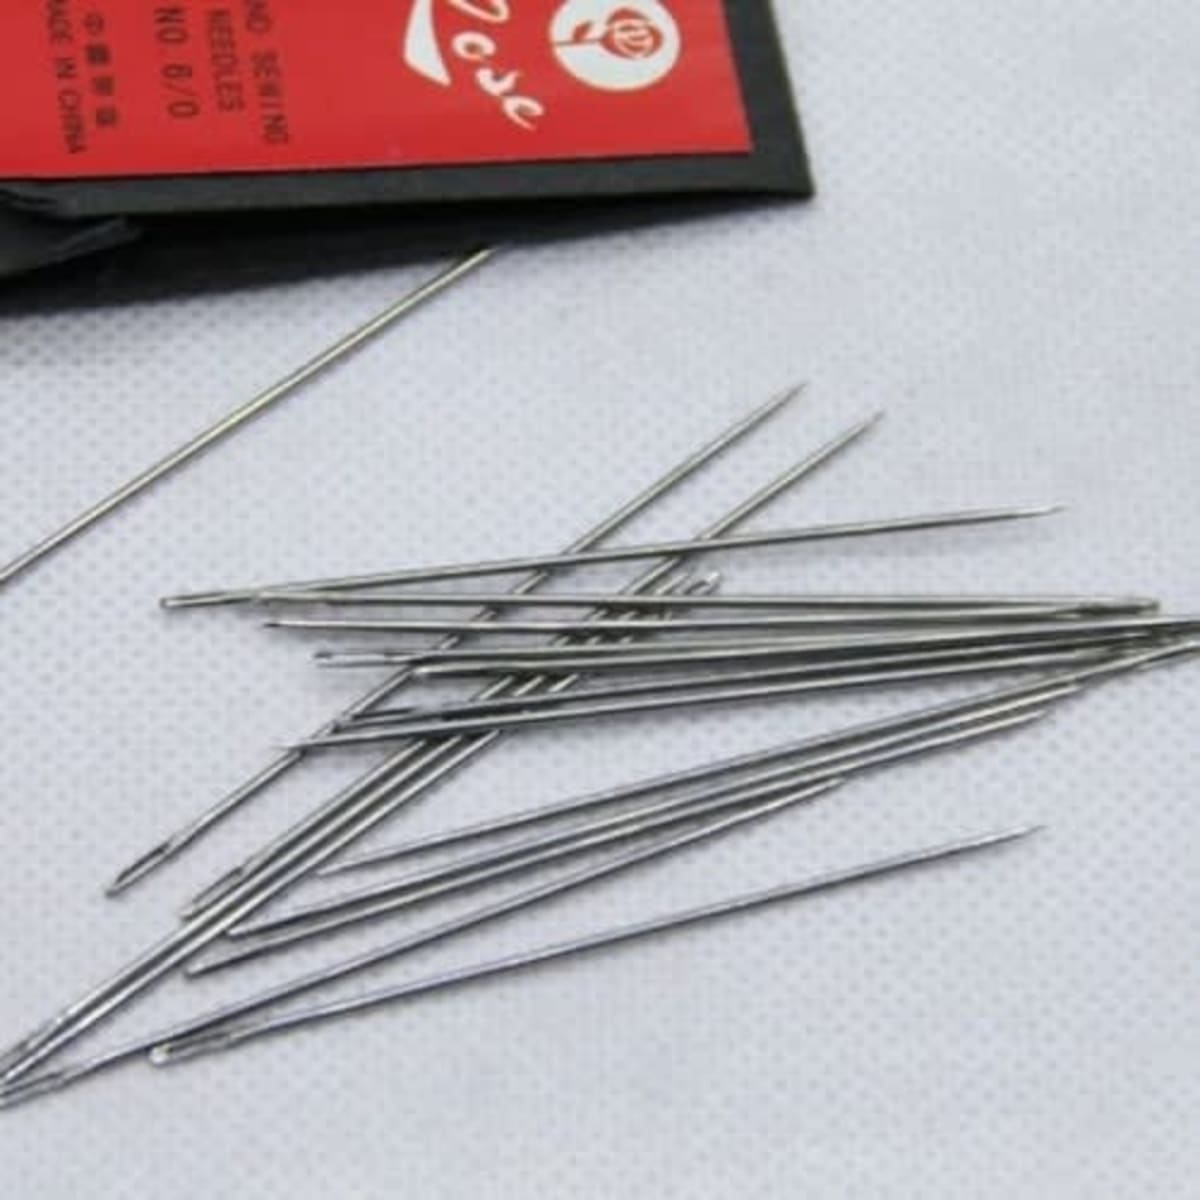 Rose Hand Sewing Needles - Big Eyelet -Size 5 - 5pieces